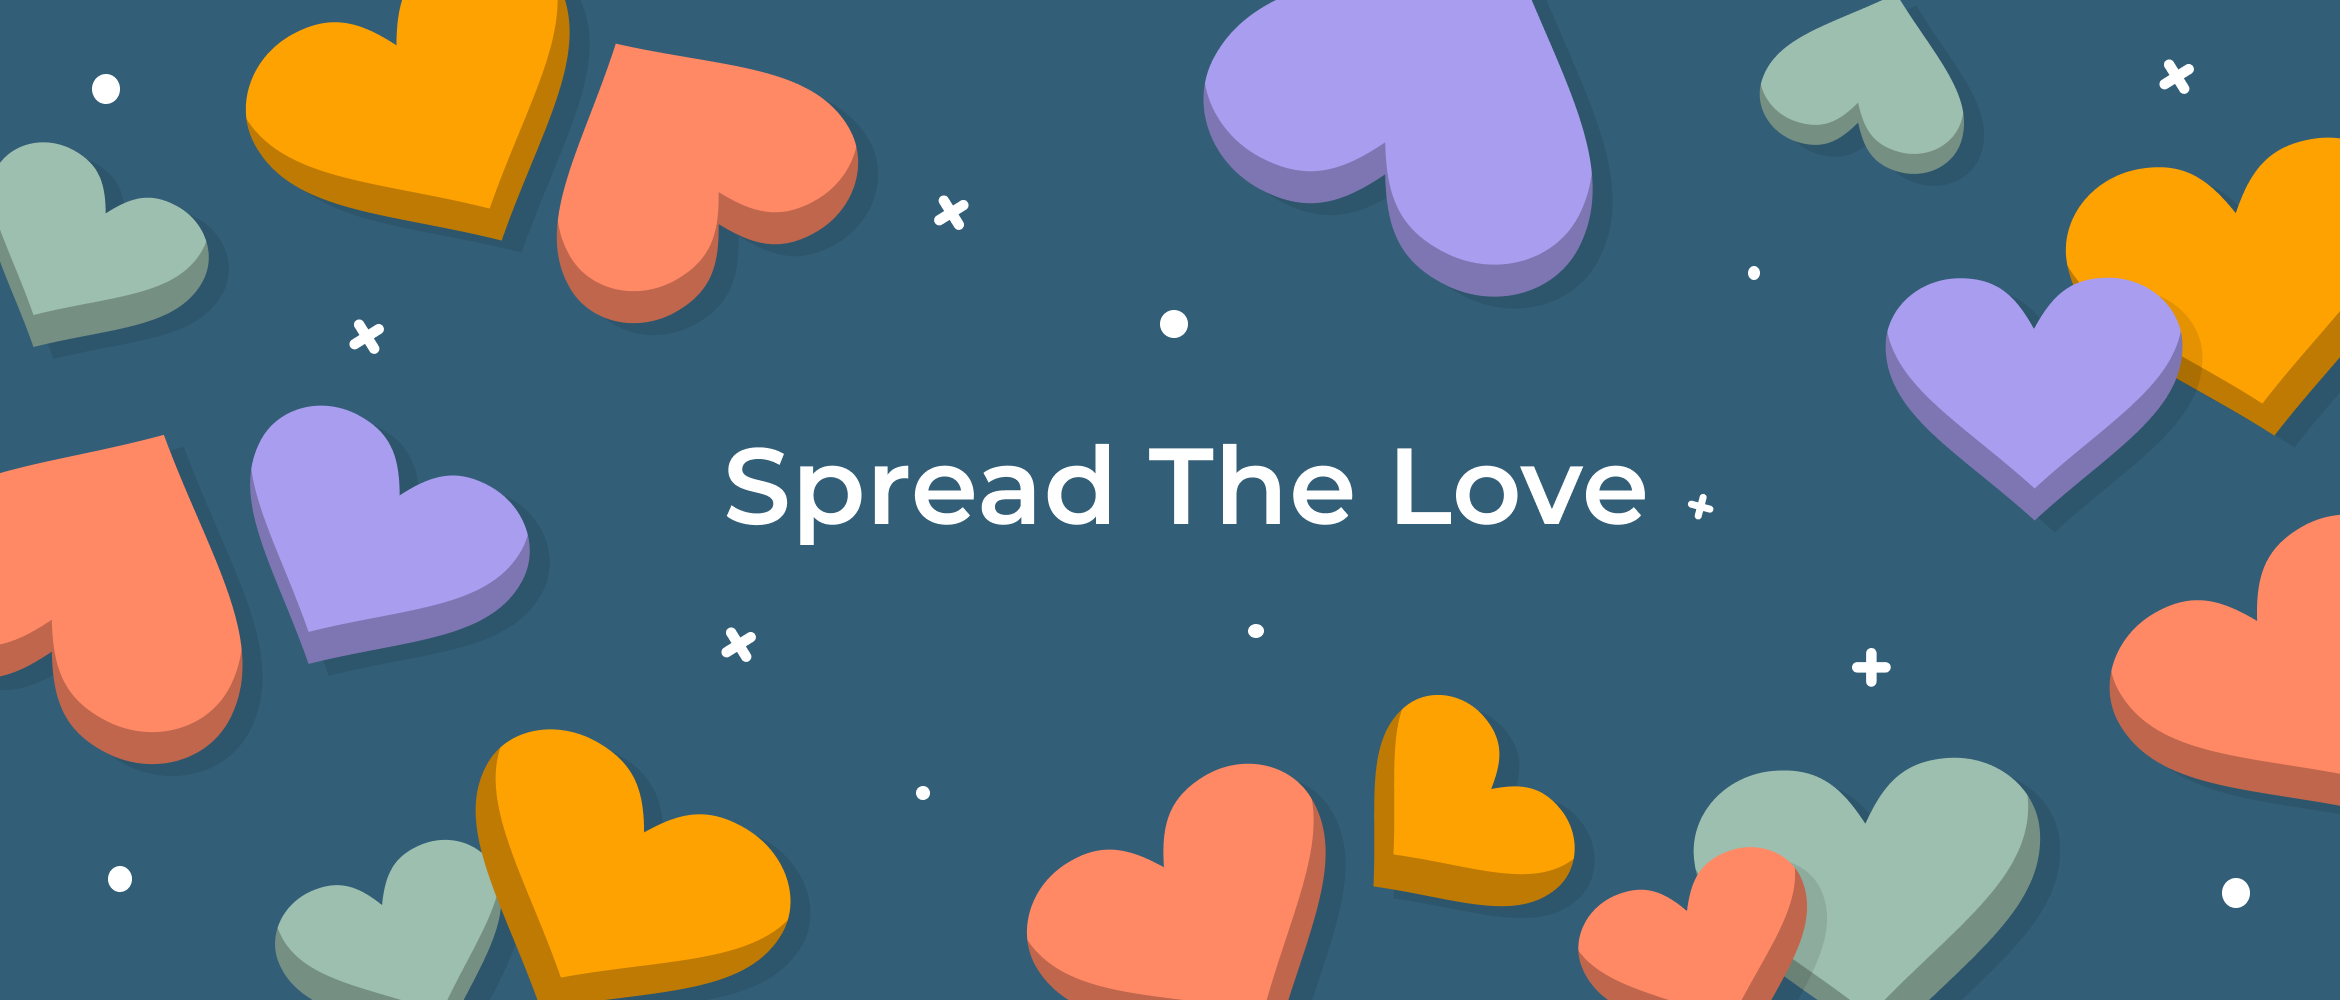 The words 'Spread The Love' are shown on a dark blue-teal background with purple, red, yellow and green hearts and white stars. 